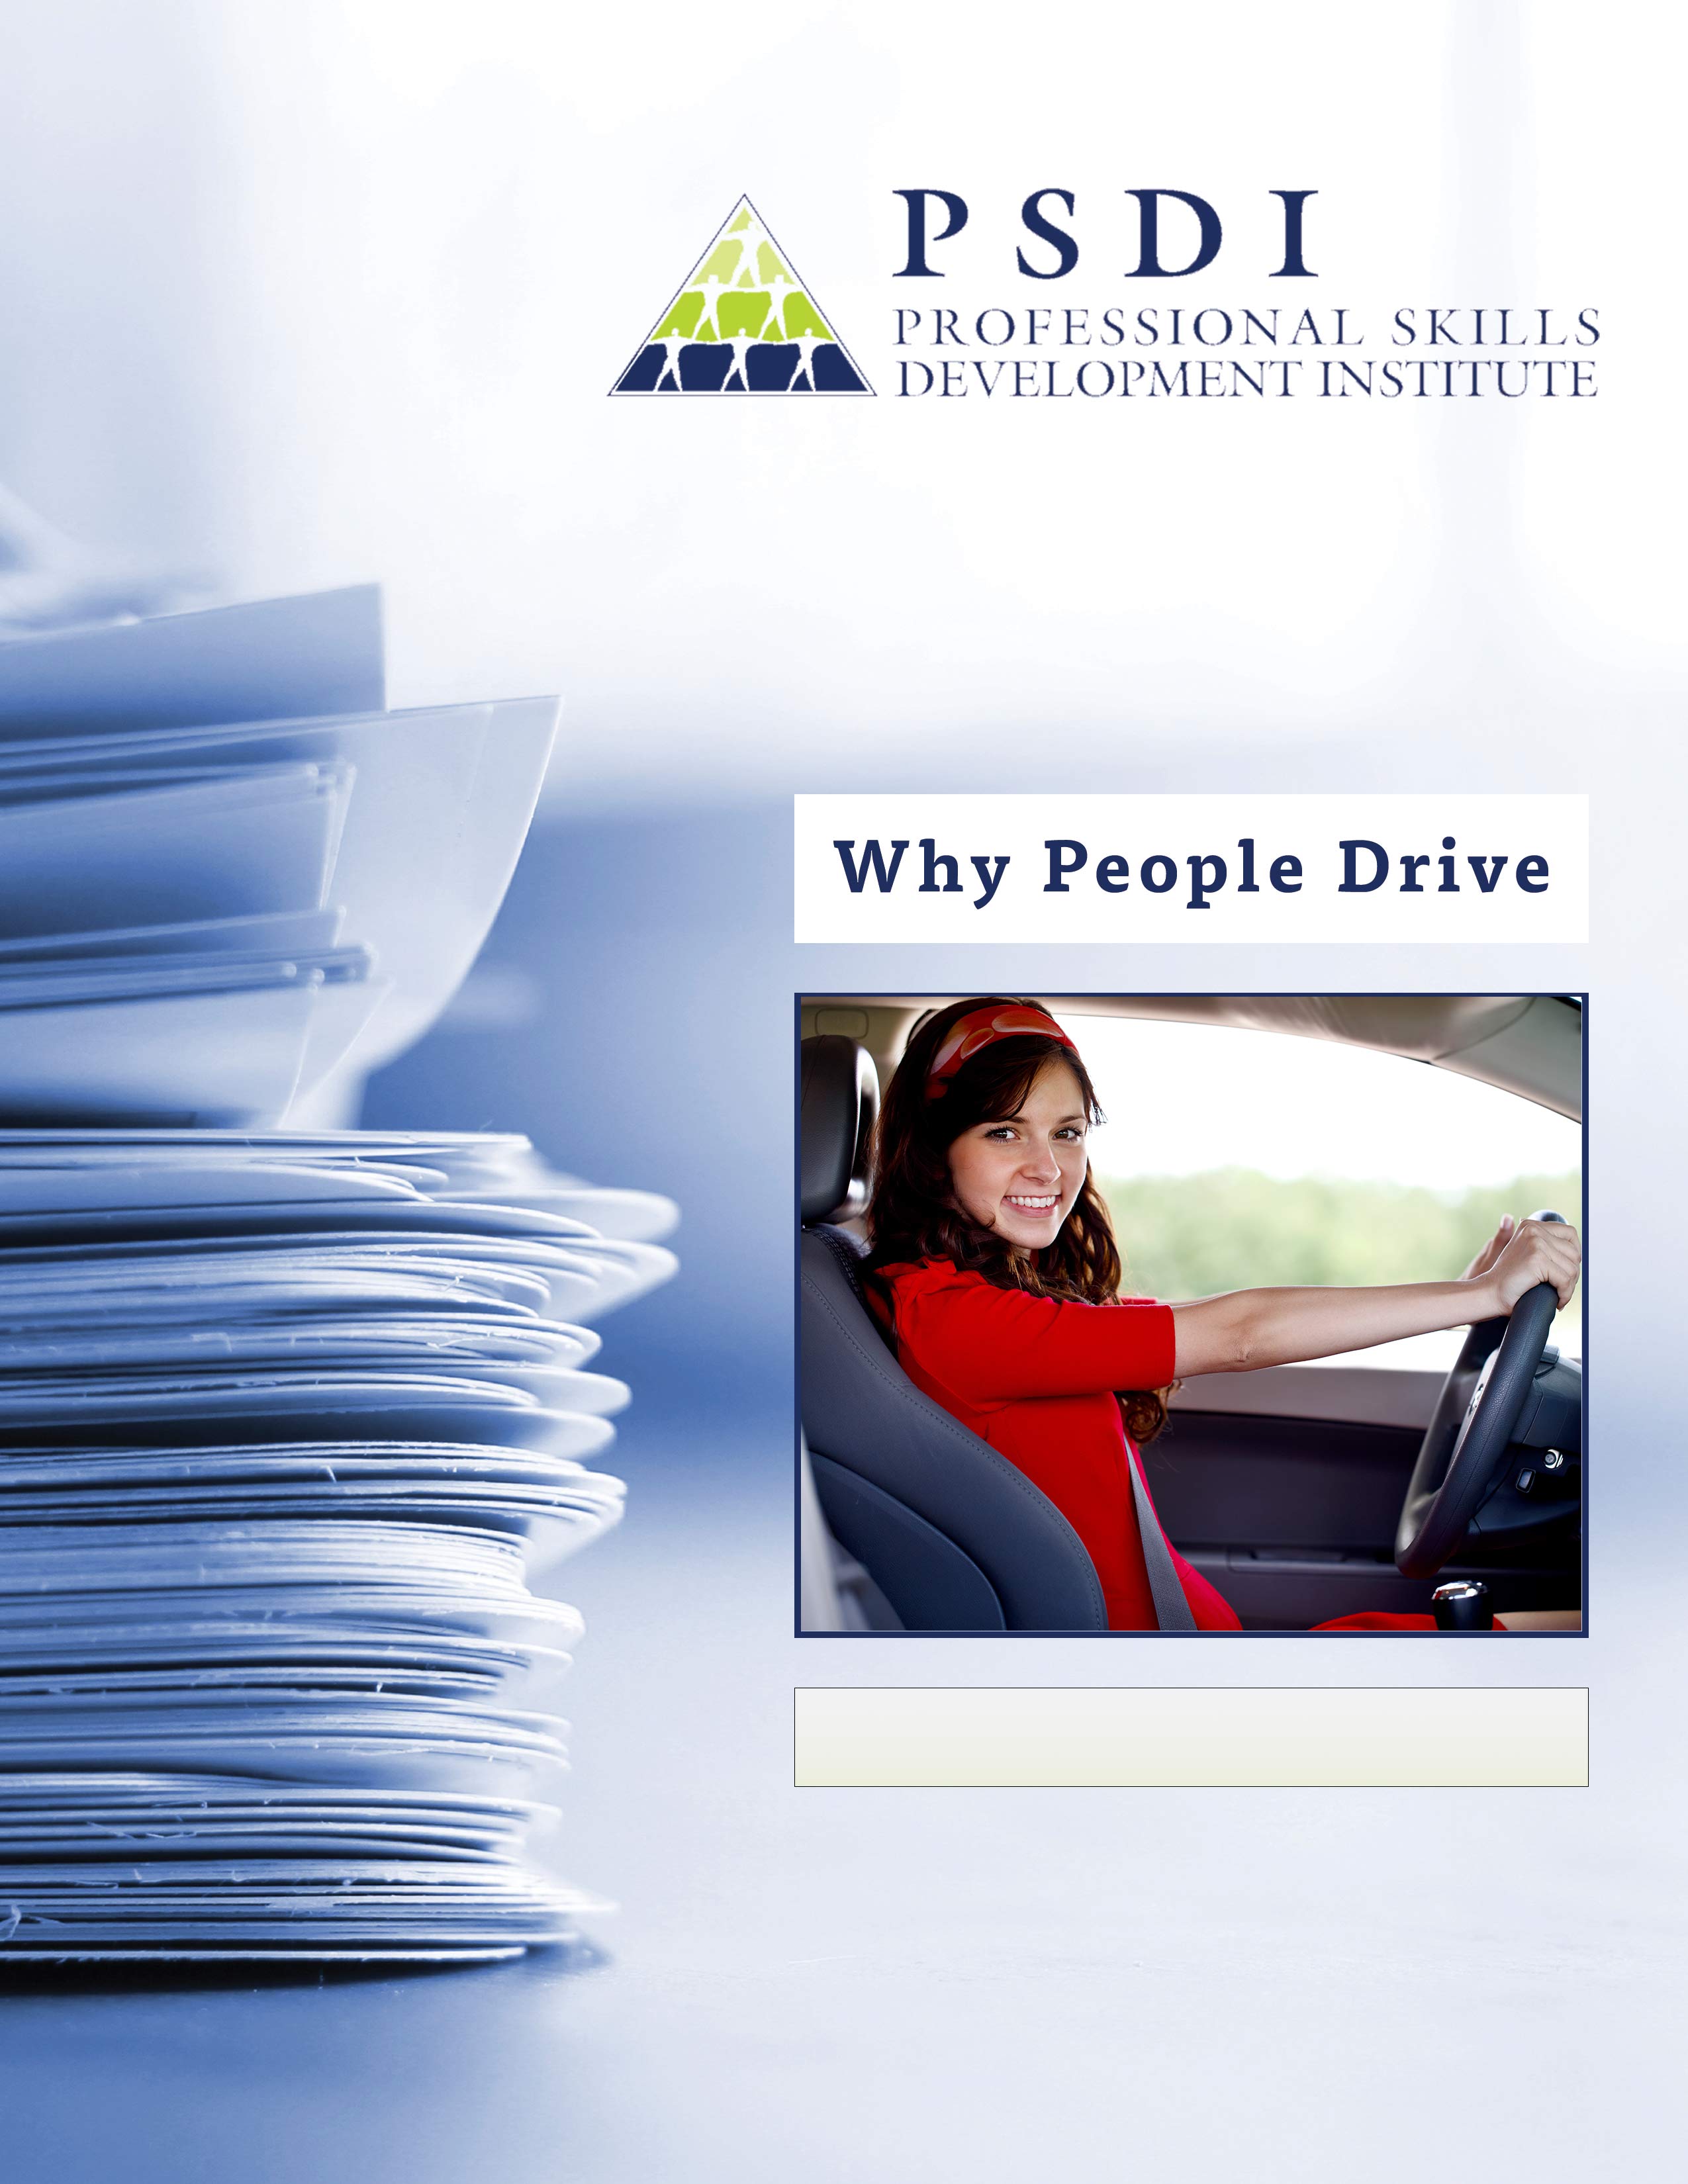 Why People Drive - Research PSDI